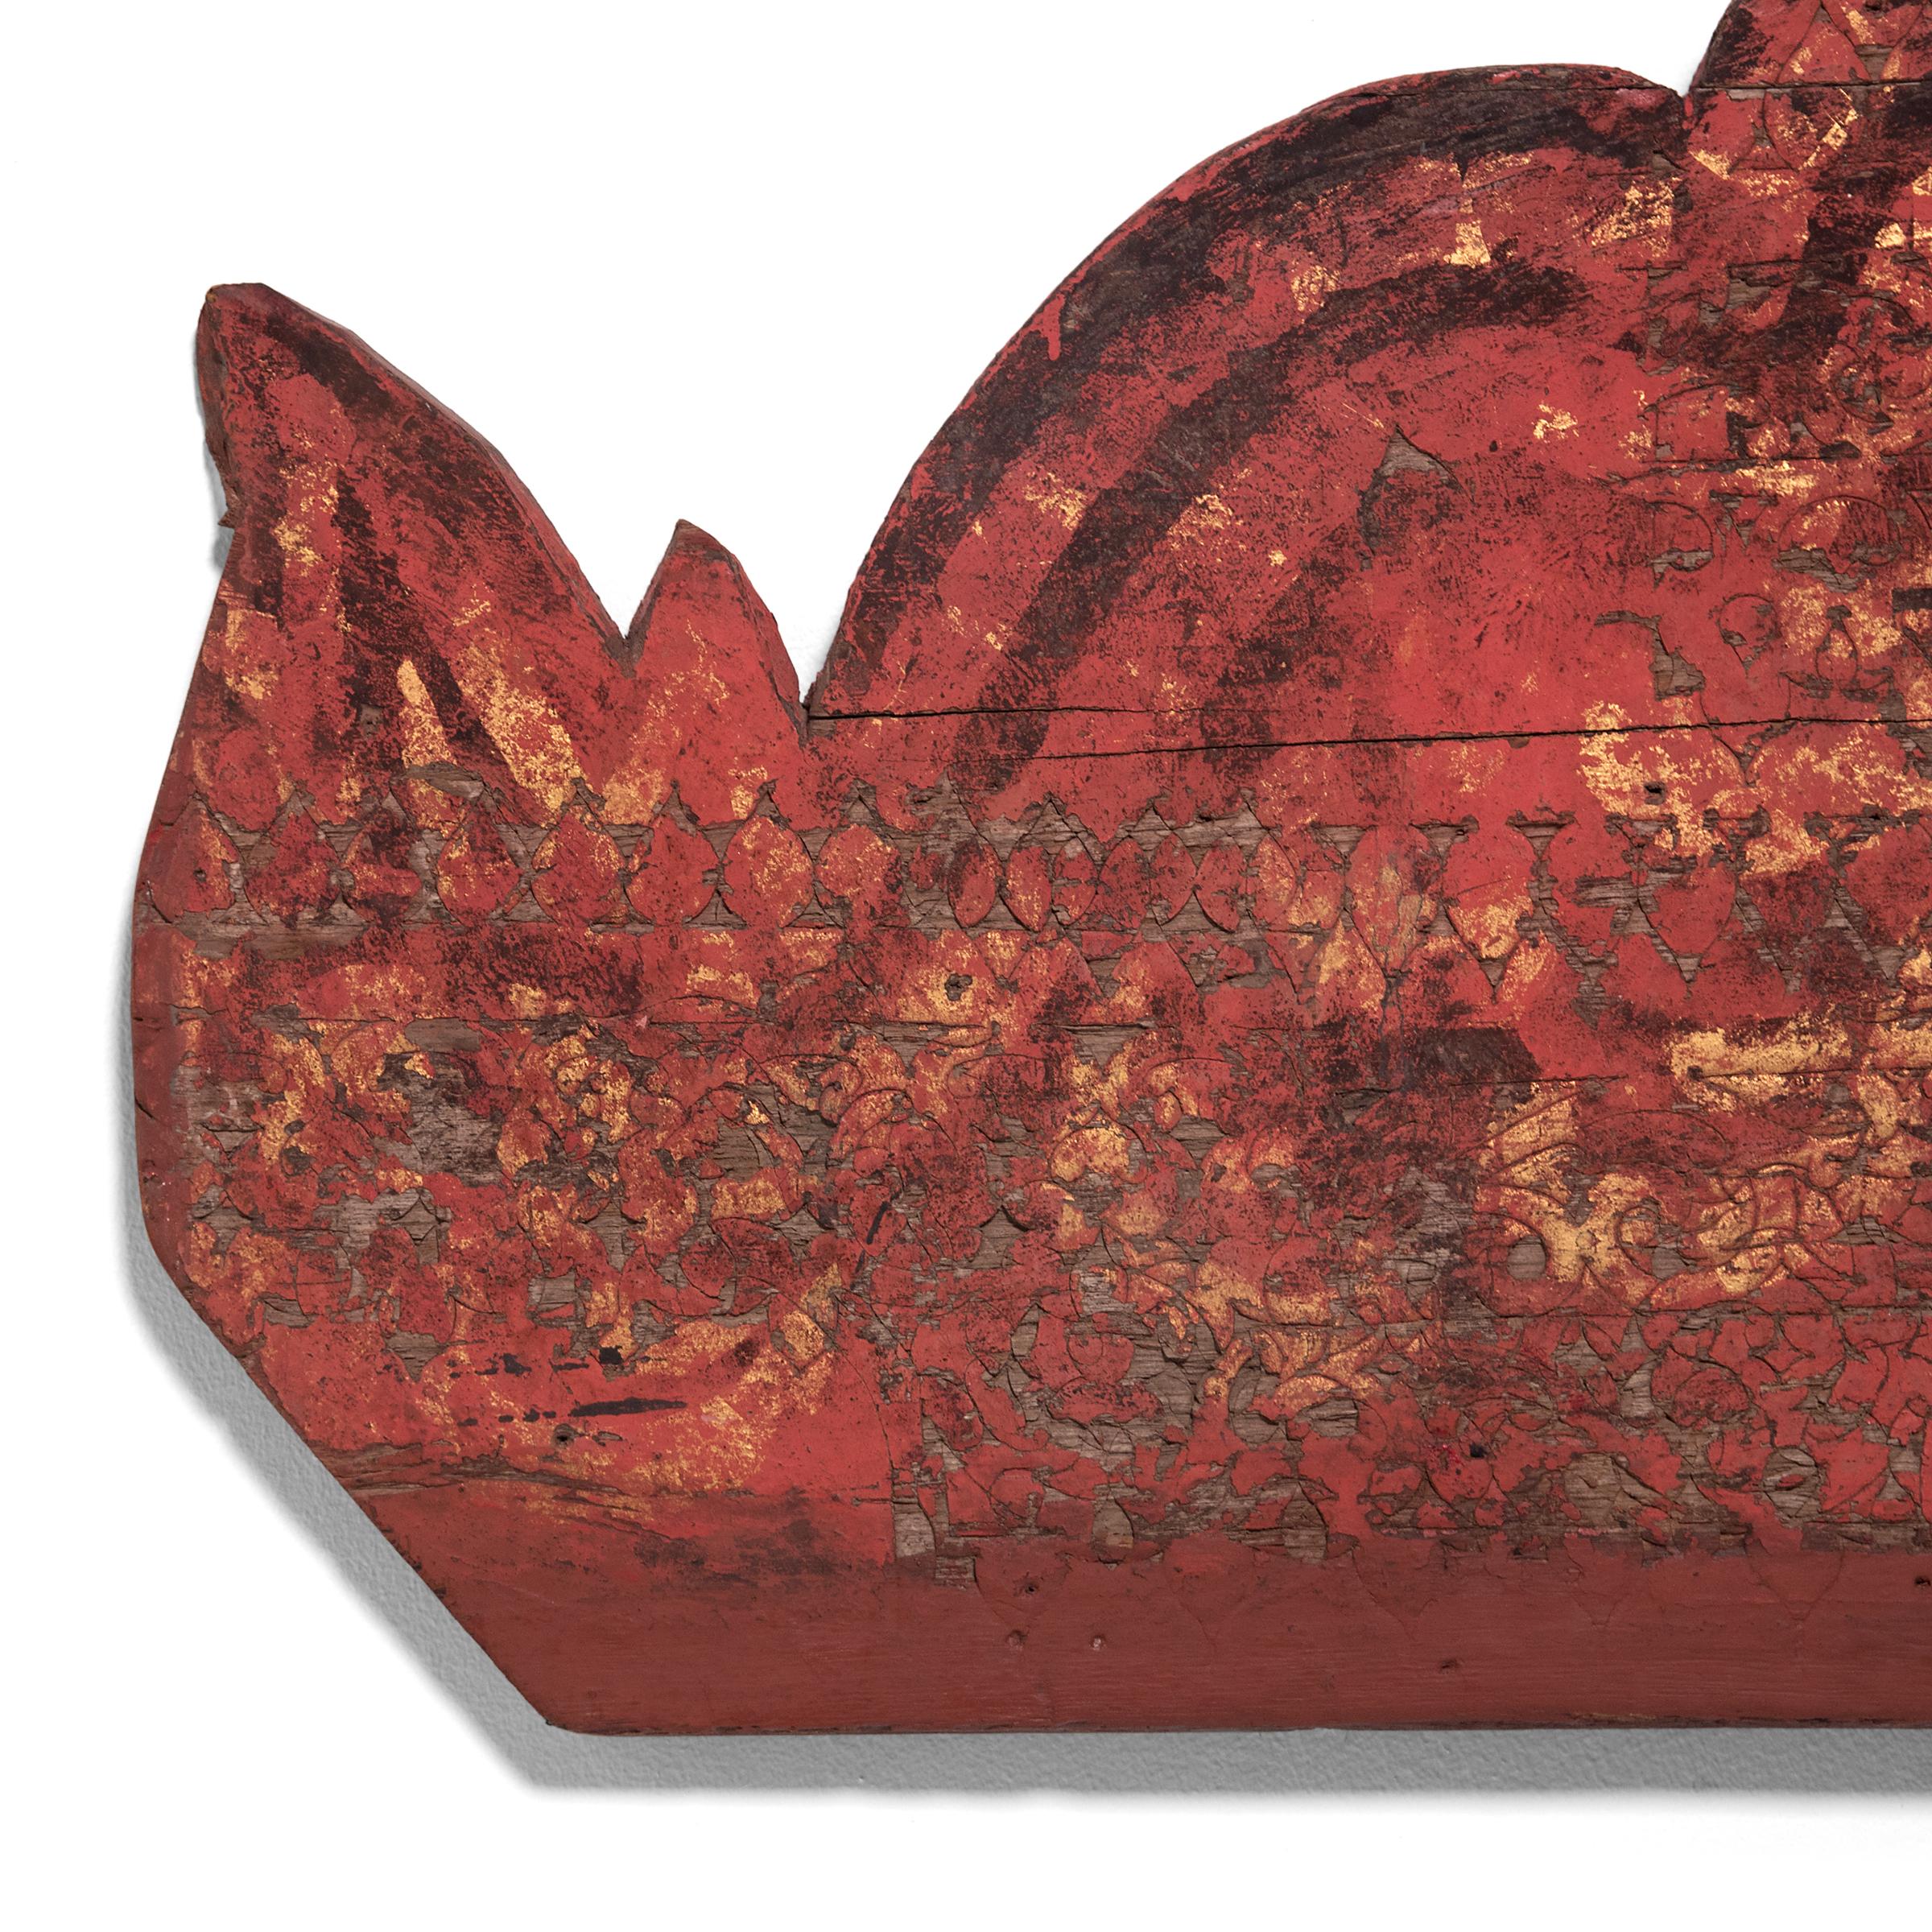 Red Lacquer Architectural Fragment, c. 1850 - Abstract Mixed Media Art by Unknown